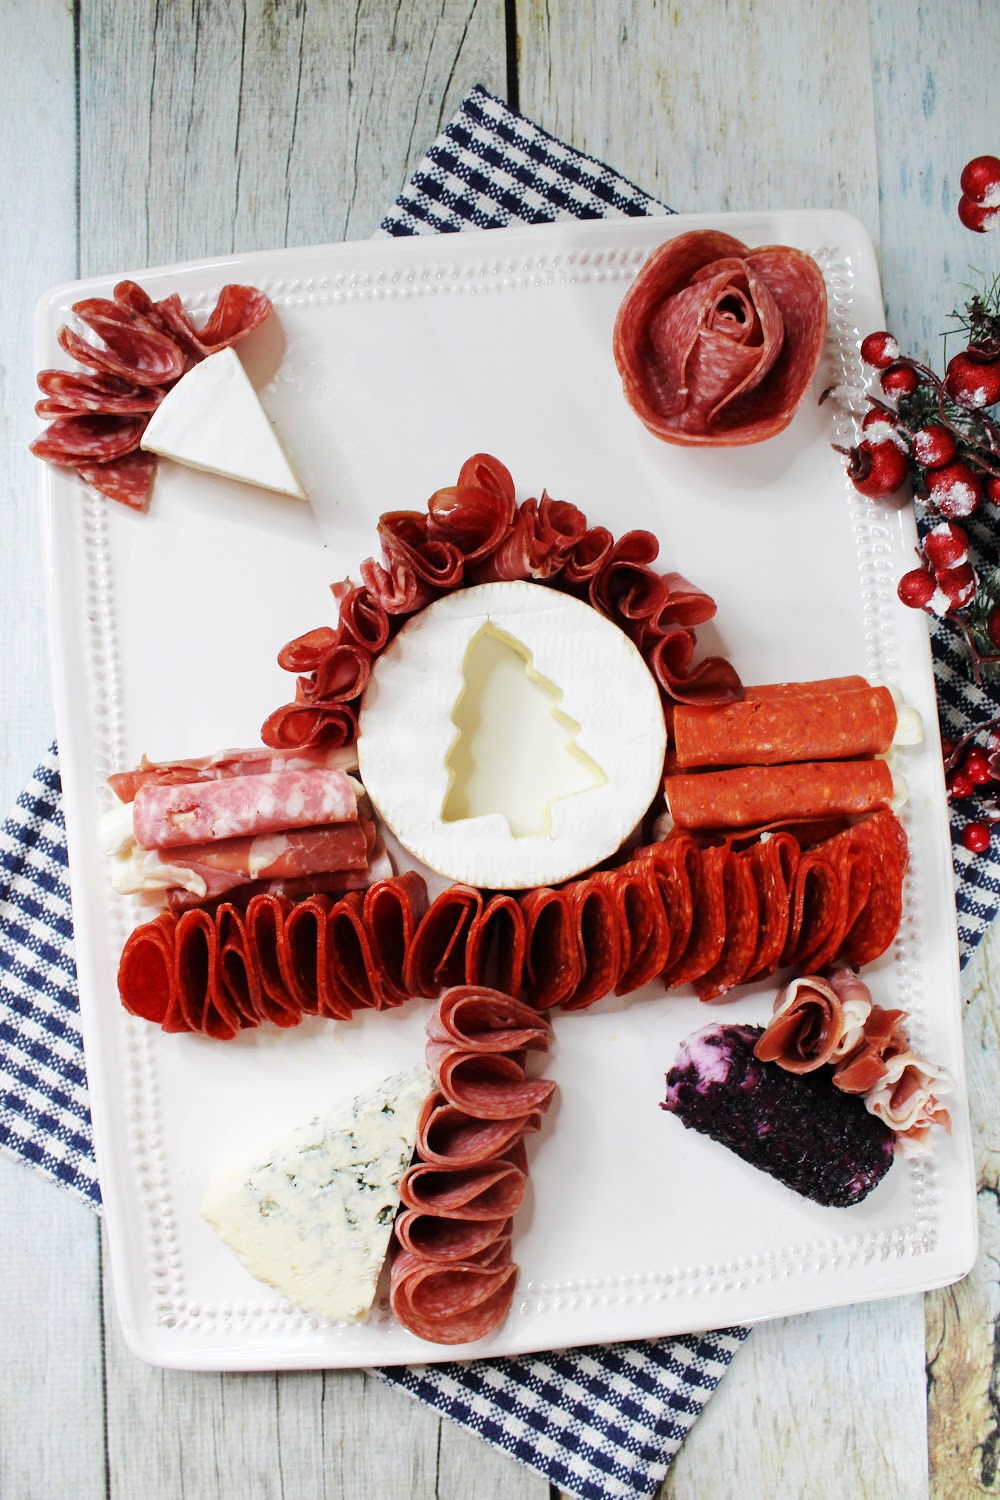 For the Christmas charcuterie board, place the Christmas tree brie in middle and then add the meats around it.